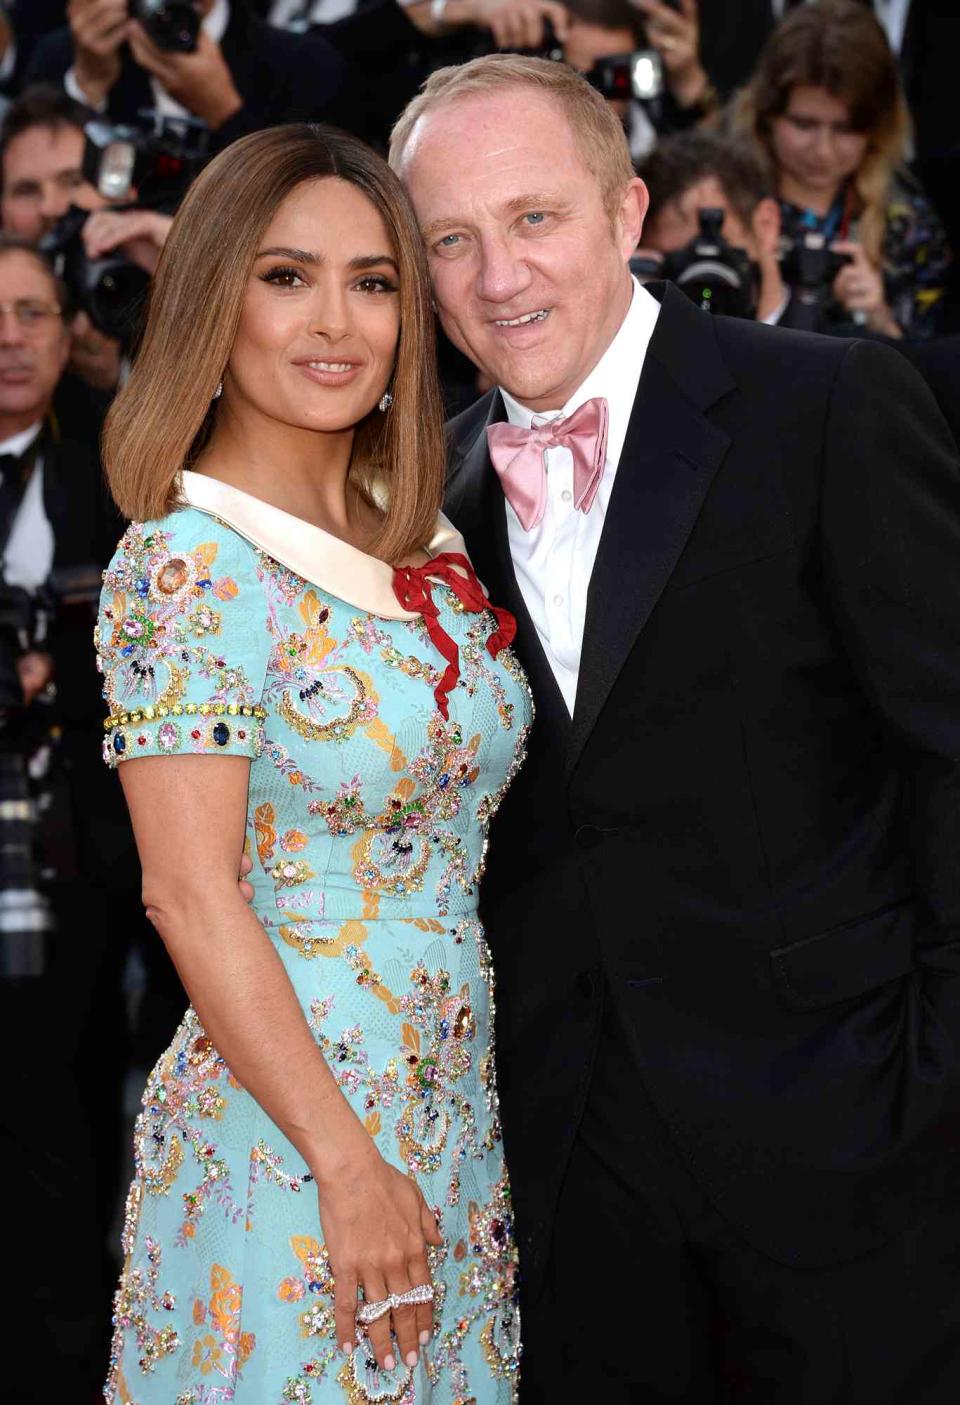 Francois-Henri Pinault and Salma Hayek attend the 70th anniversary event during the 70th annual Cannes Film Festival at Palais des Festivals on May 23, 2017 in Cannes, France